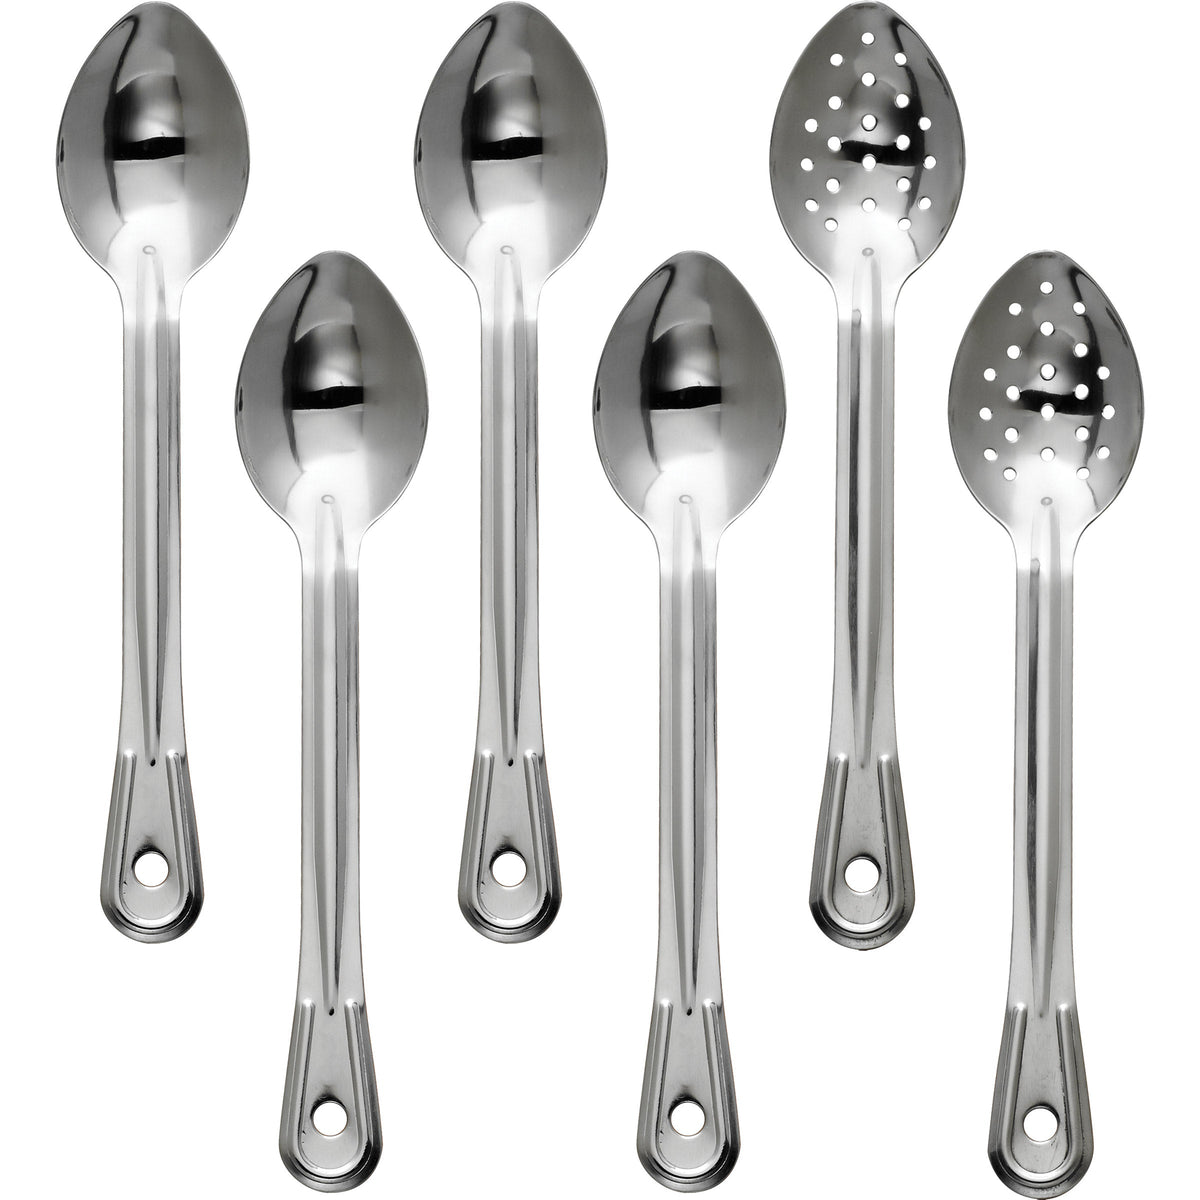 Tramontina Serving Spoons, Assorted Styles, Stainless Steel, 6-count Image